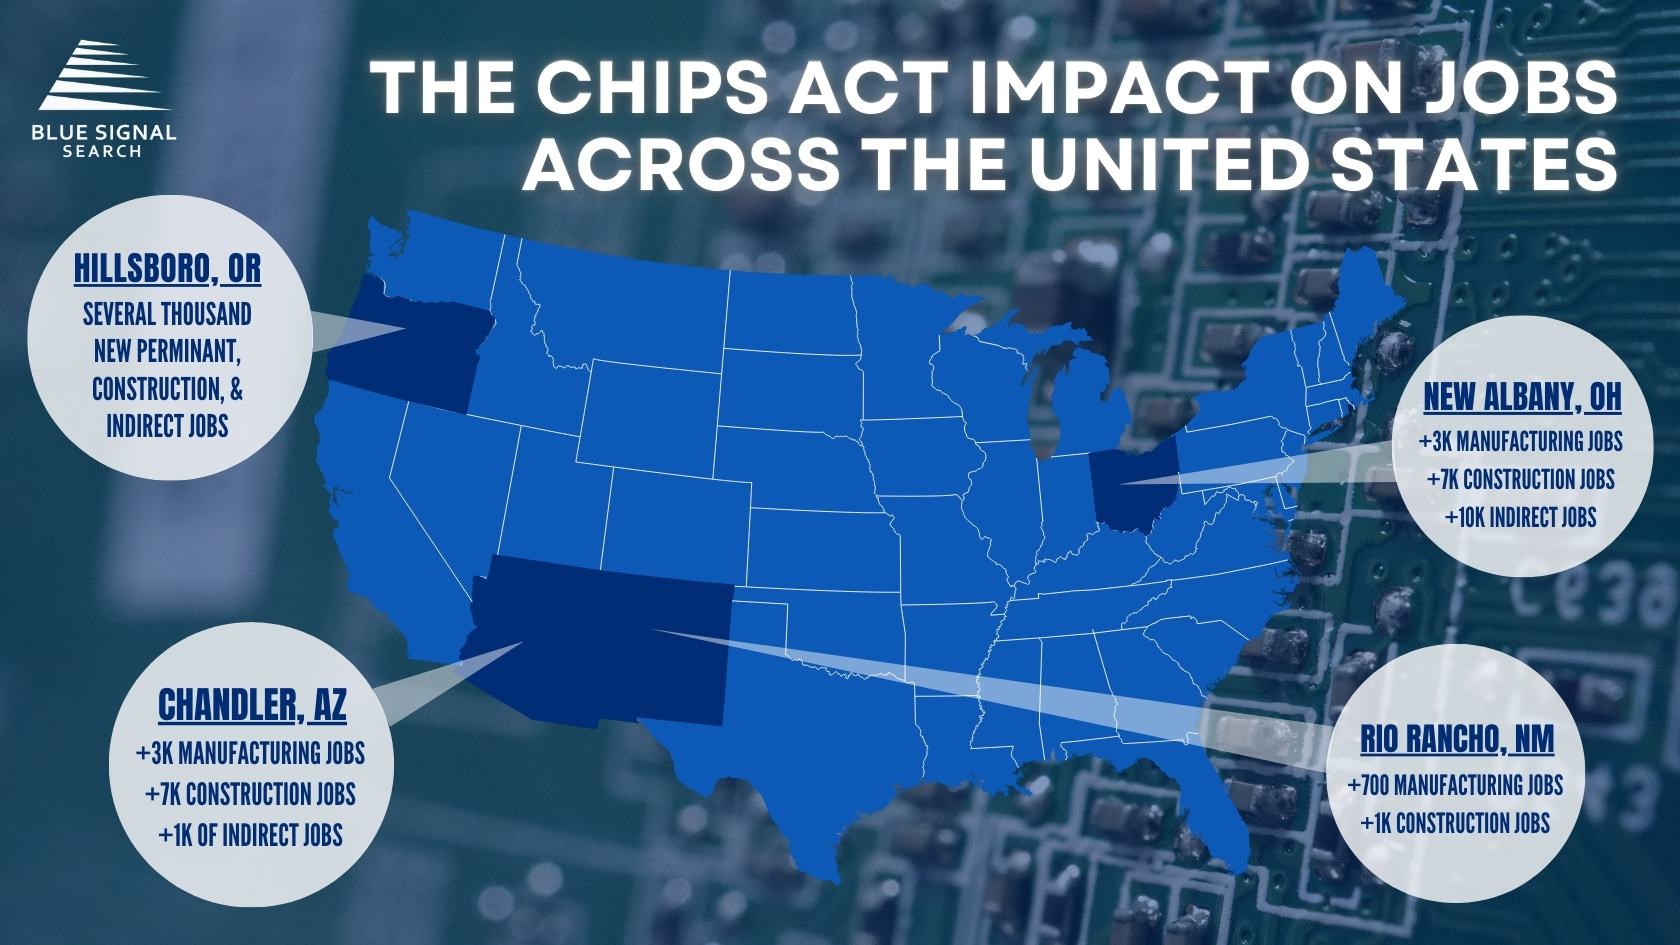 An infographic showcasing the job creation impact of the CHIPS Act in various U.S. locations, including Hillsboro, Chandler, New Albany, and Rio Rancho, in the fields of manufacturing, construction, and indirect jobs.